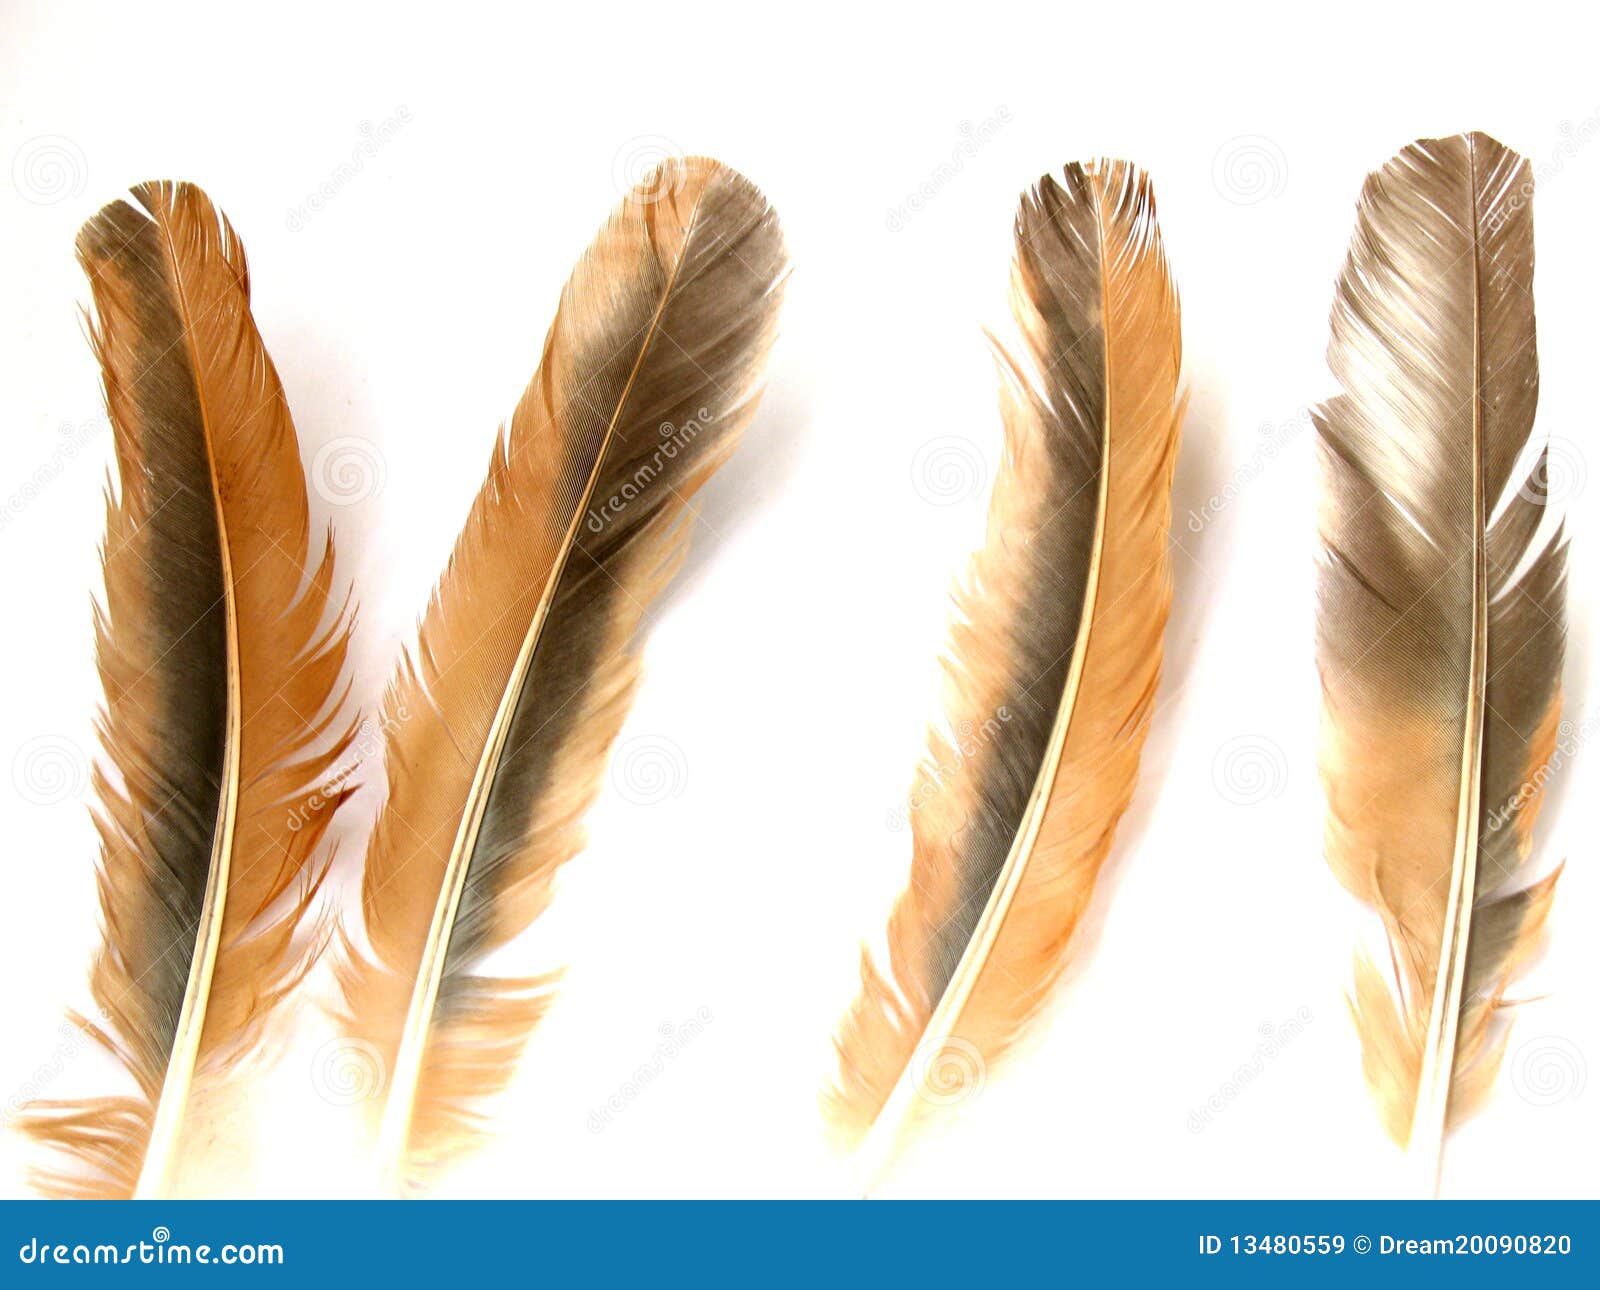 Brown feathers stock image. Image of birds, feathers - 13480559